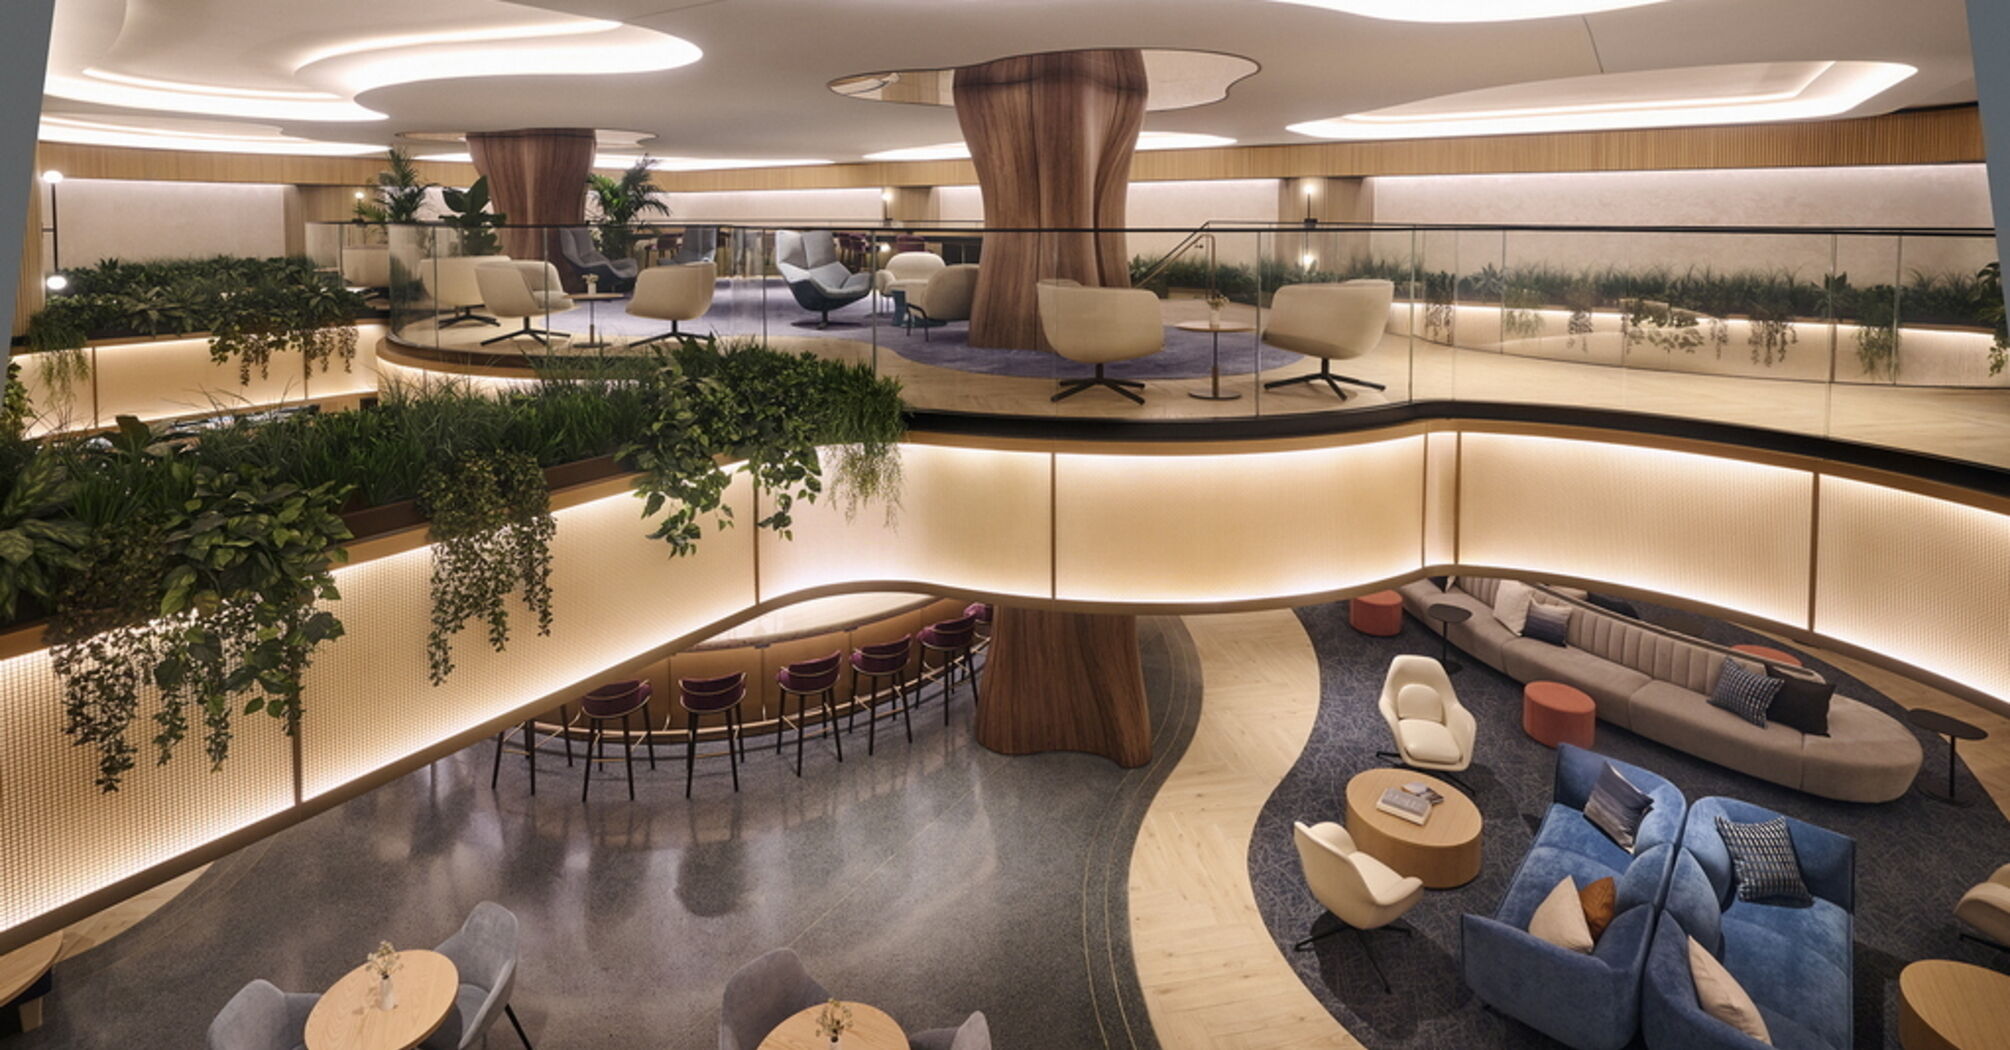 An update in the world of design: Attractive and modern lounge at La Guardia Airport